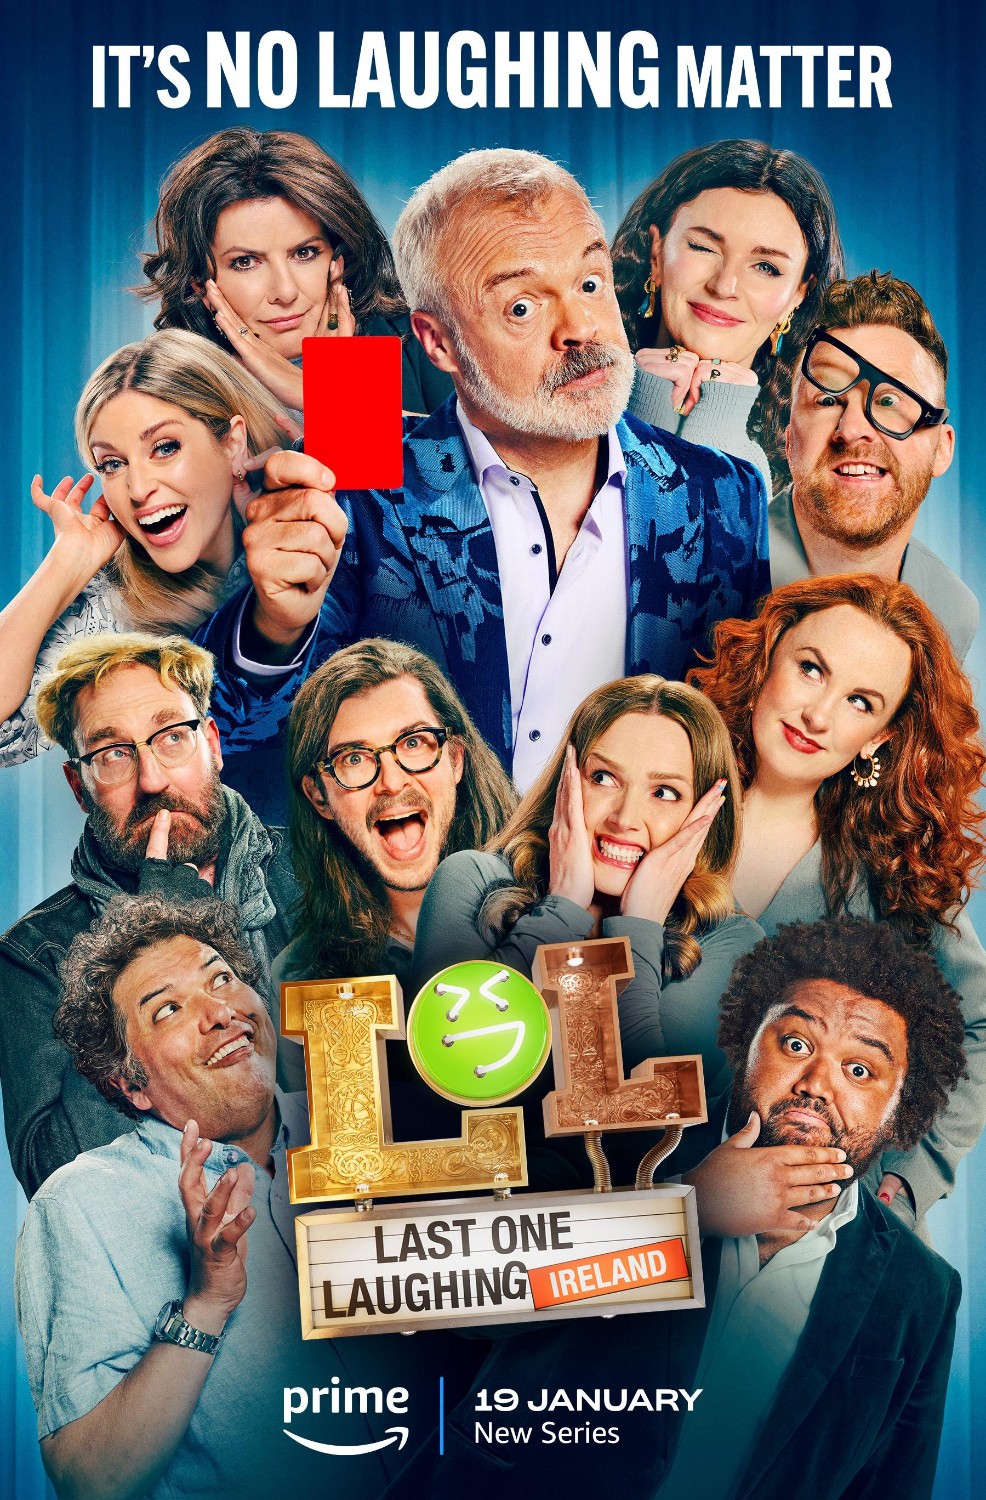 LOL Last One Laughing Ireland S01E01 [1080p] (H264) [6 CH] Bf85d7238b0d1adf36346439d79684ce